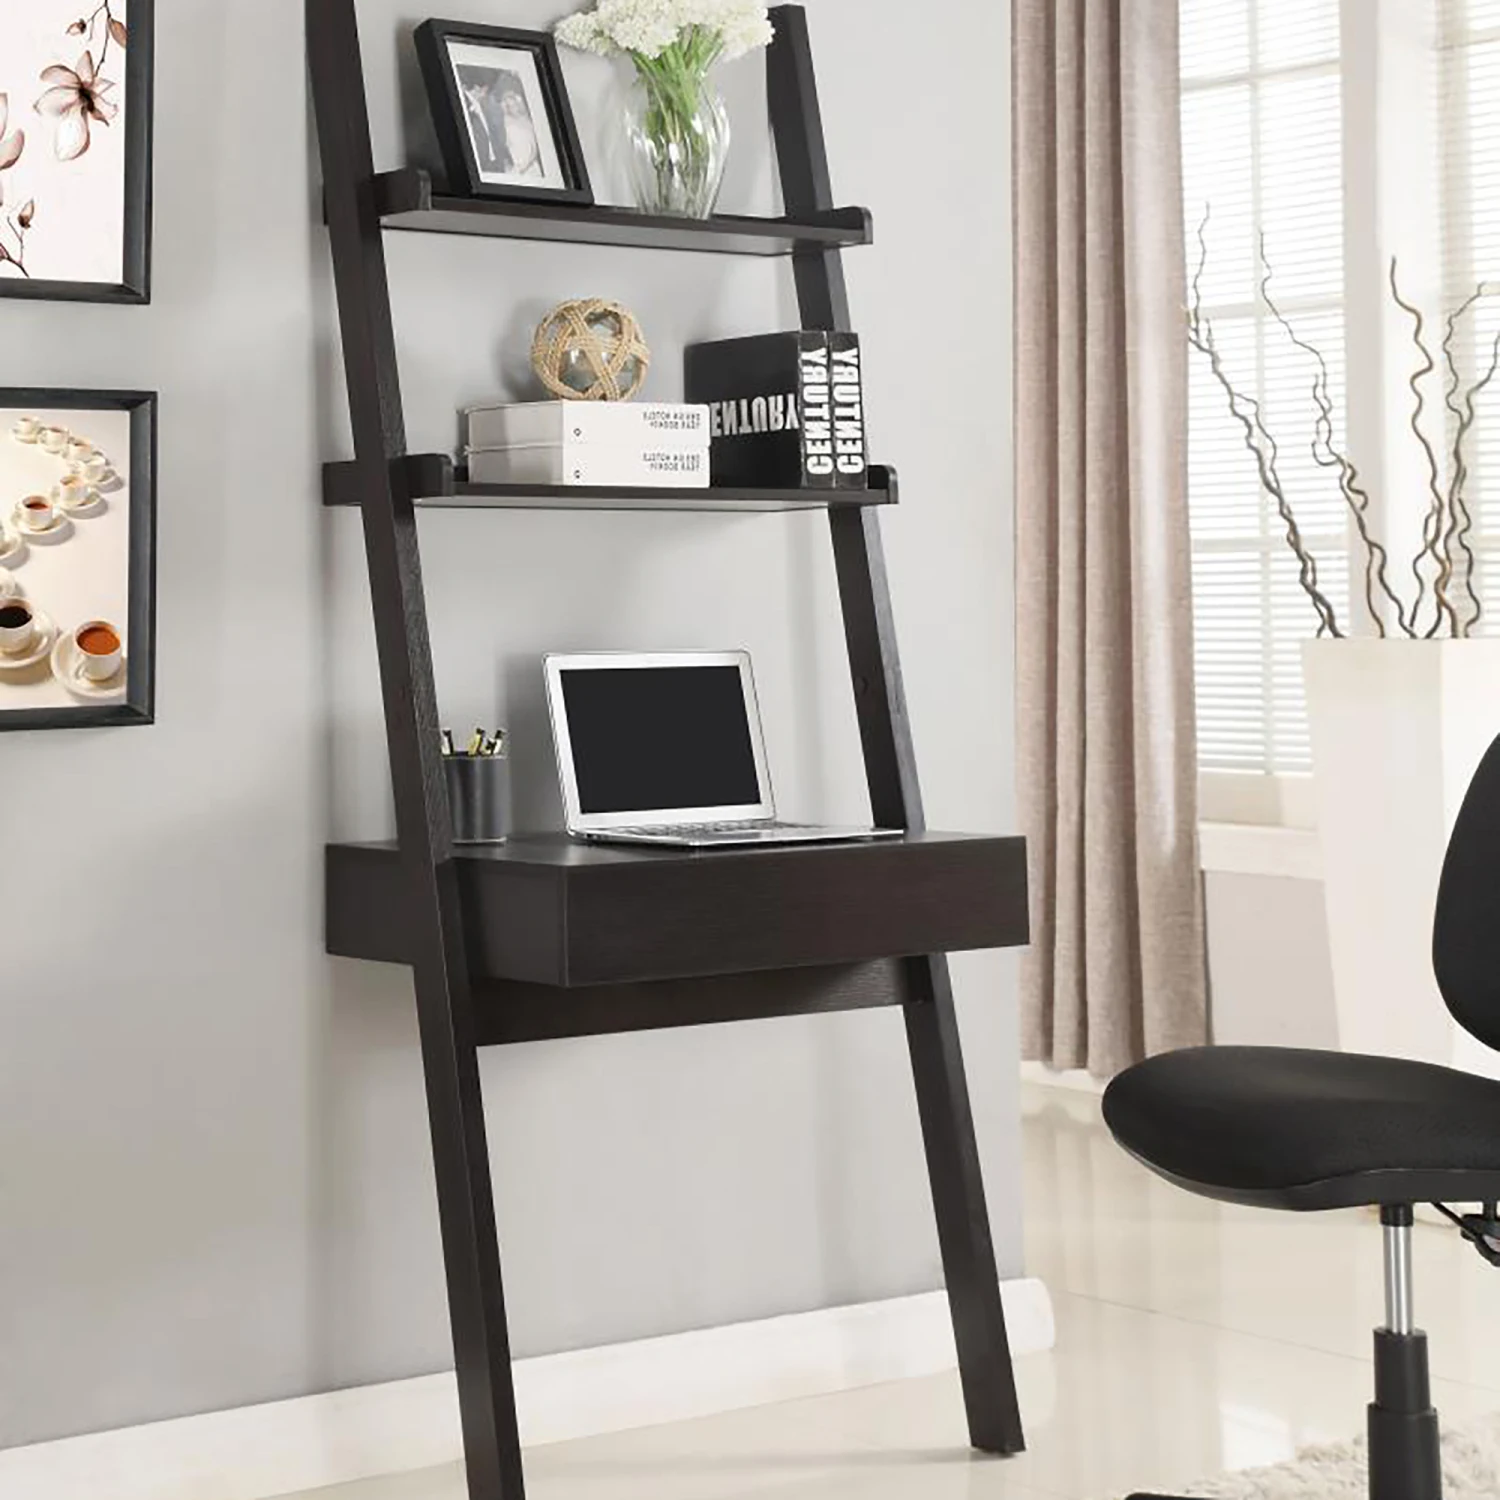 

Stylish Cappuccino Leaning Ladder Wall Desk with Modern Design perfect for Small Spaces and Home Offices desk